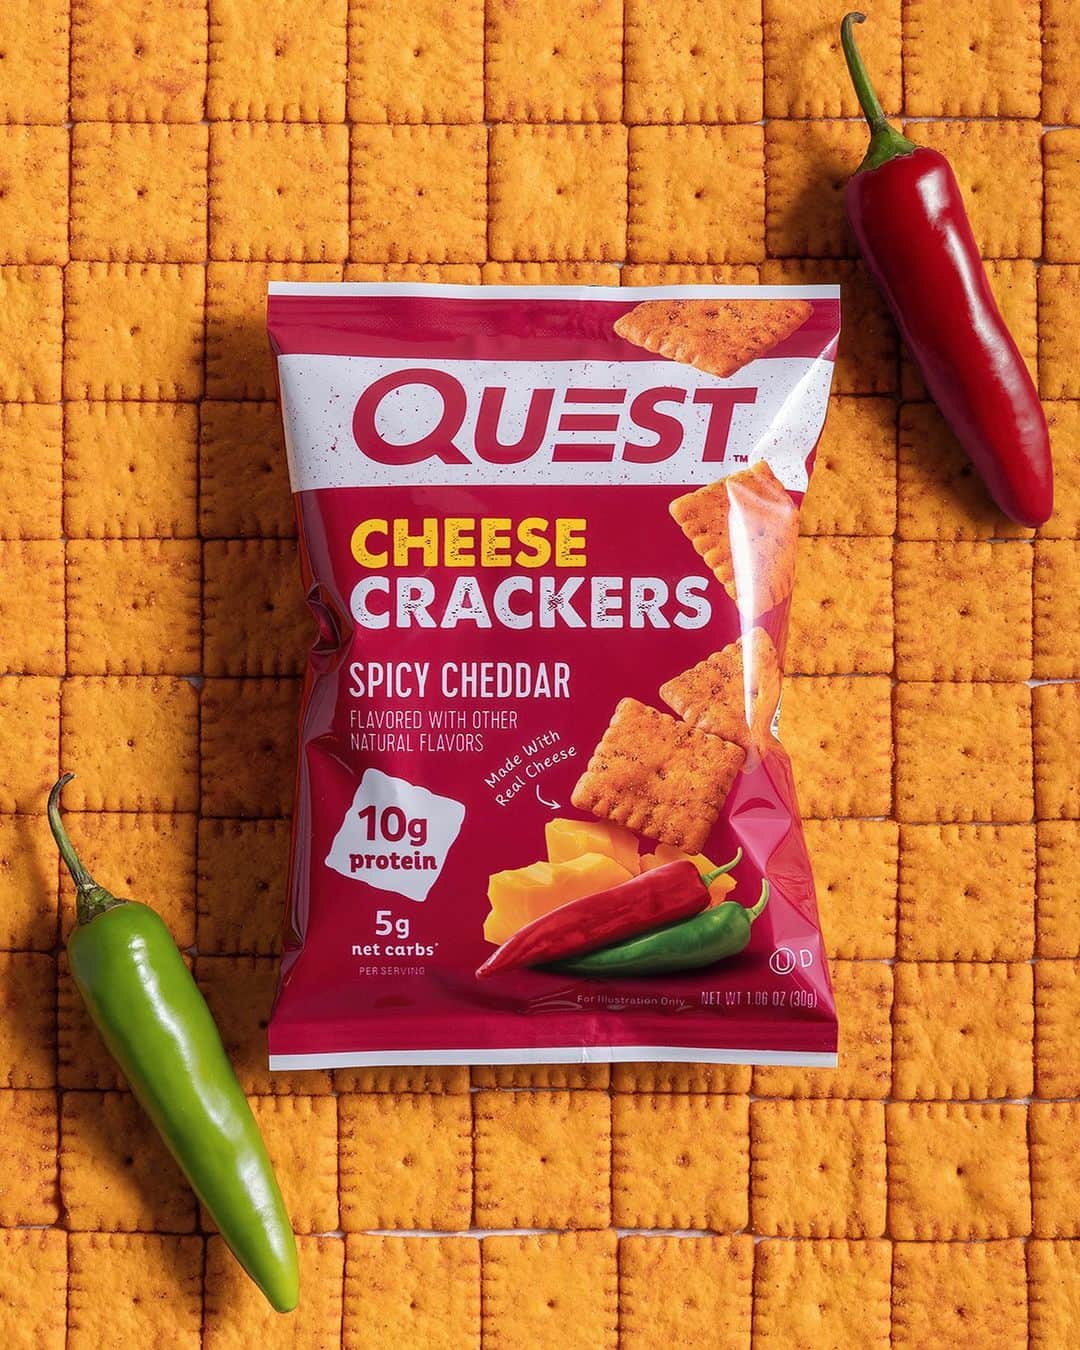 questnutritionのインスタグラム：「DOUBLE TAP to welcome the Quest™ Spicy Cheddar Cheese Crackers! 💪🔥🧀🍘 These savory, delicious, & athlete-worthy protein cheese crackers are bursting with real cheese flavor + that spicy kick you crave - 10g protein & 5g net carbs per bag. 😋🥵  AVAILABLE NOW online & in stores at QuestNutrition.com, @Amazon, @VitaminShoppe, @Wegmans (Northeast, Mid-Atlantic), & your local health/nutrition stores nationwide. #OnaQuest #QuestCheeseCrackers #QuestNutrition #CheeseCrackers」